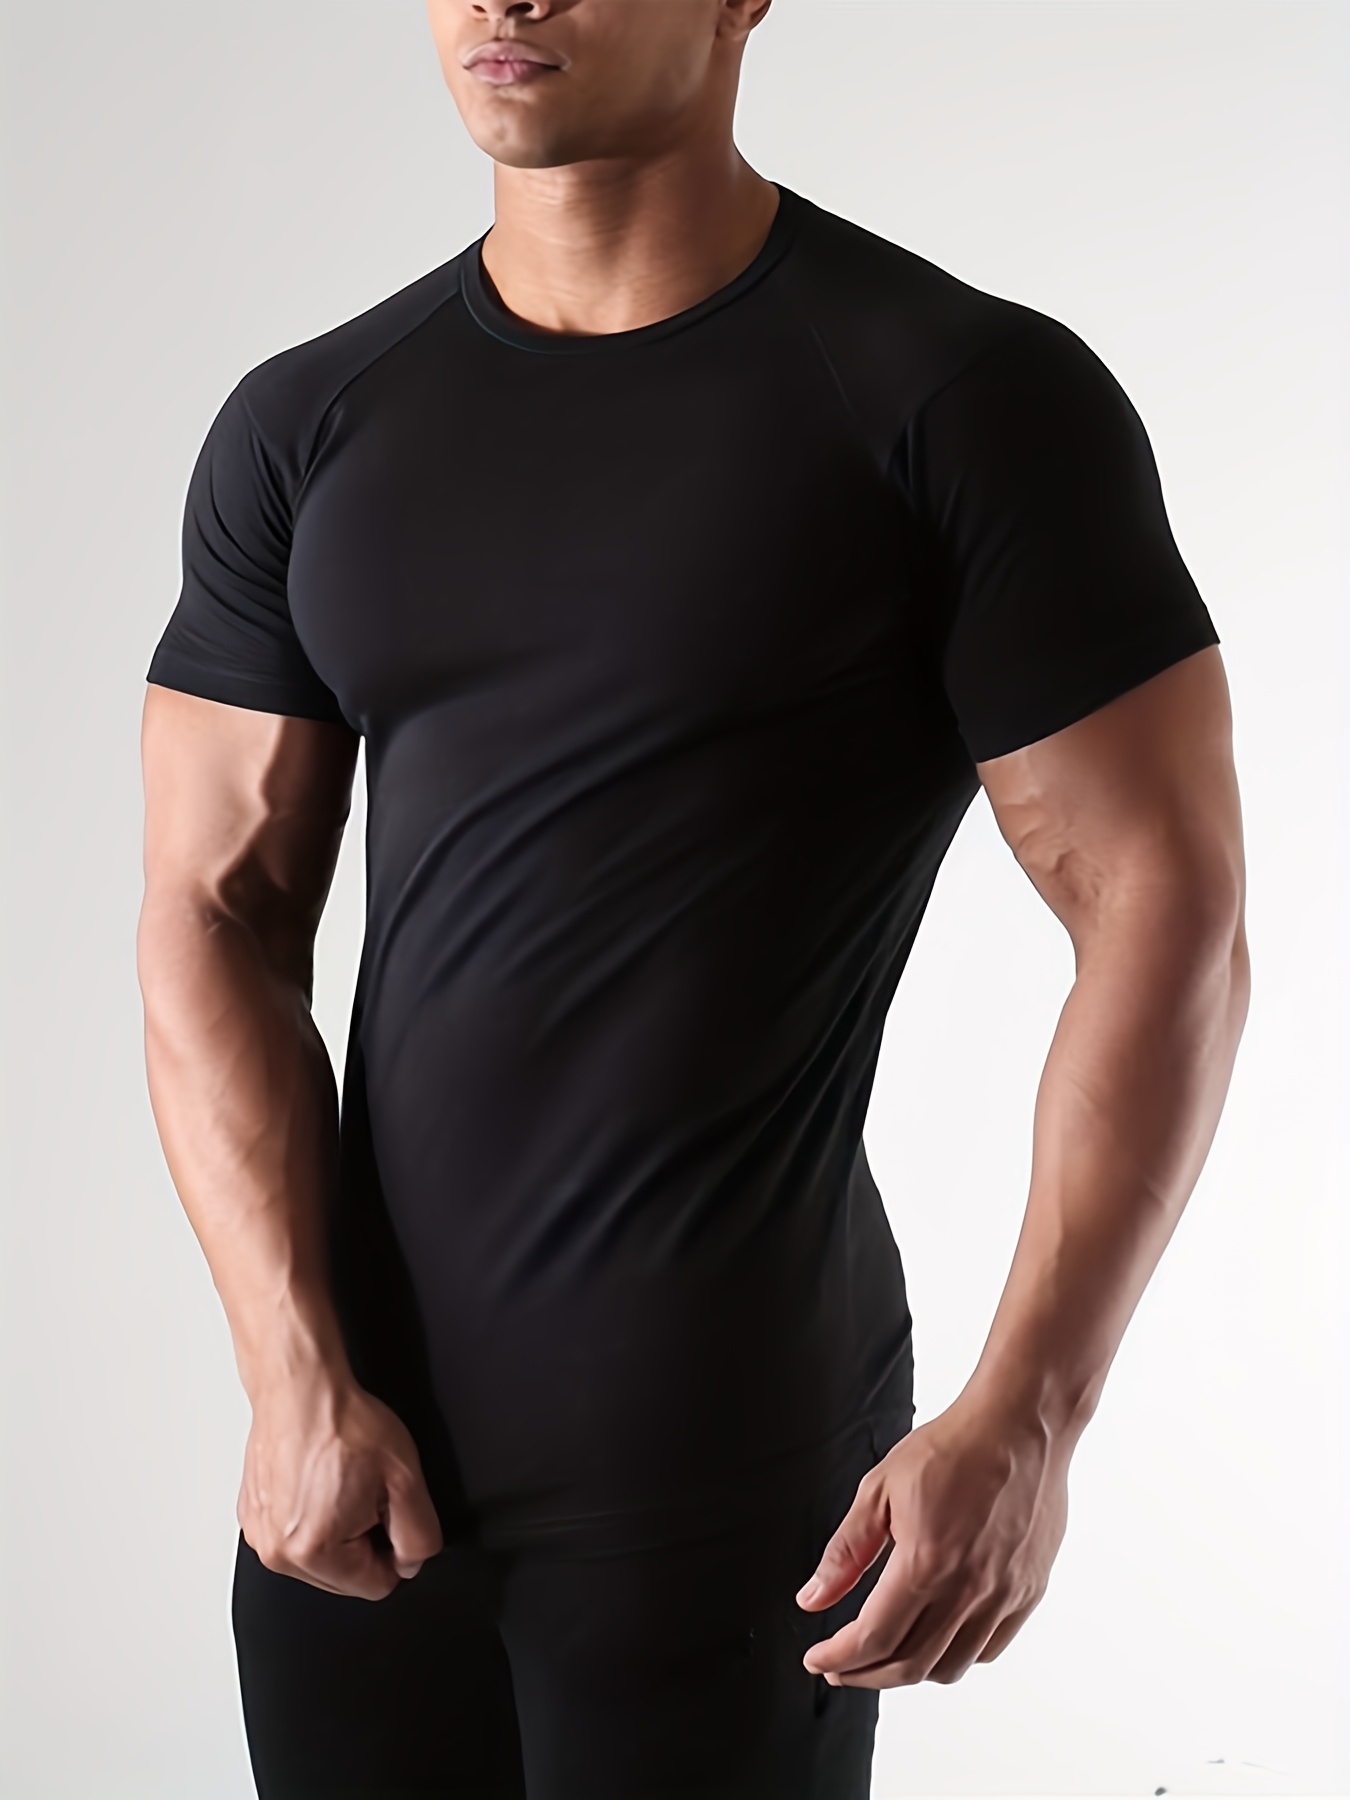 Men's Short Sleeve Shirts, T-shirts and Gym Tops